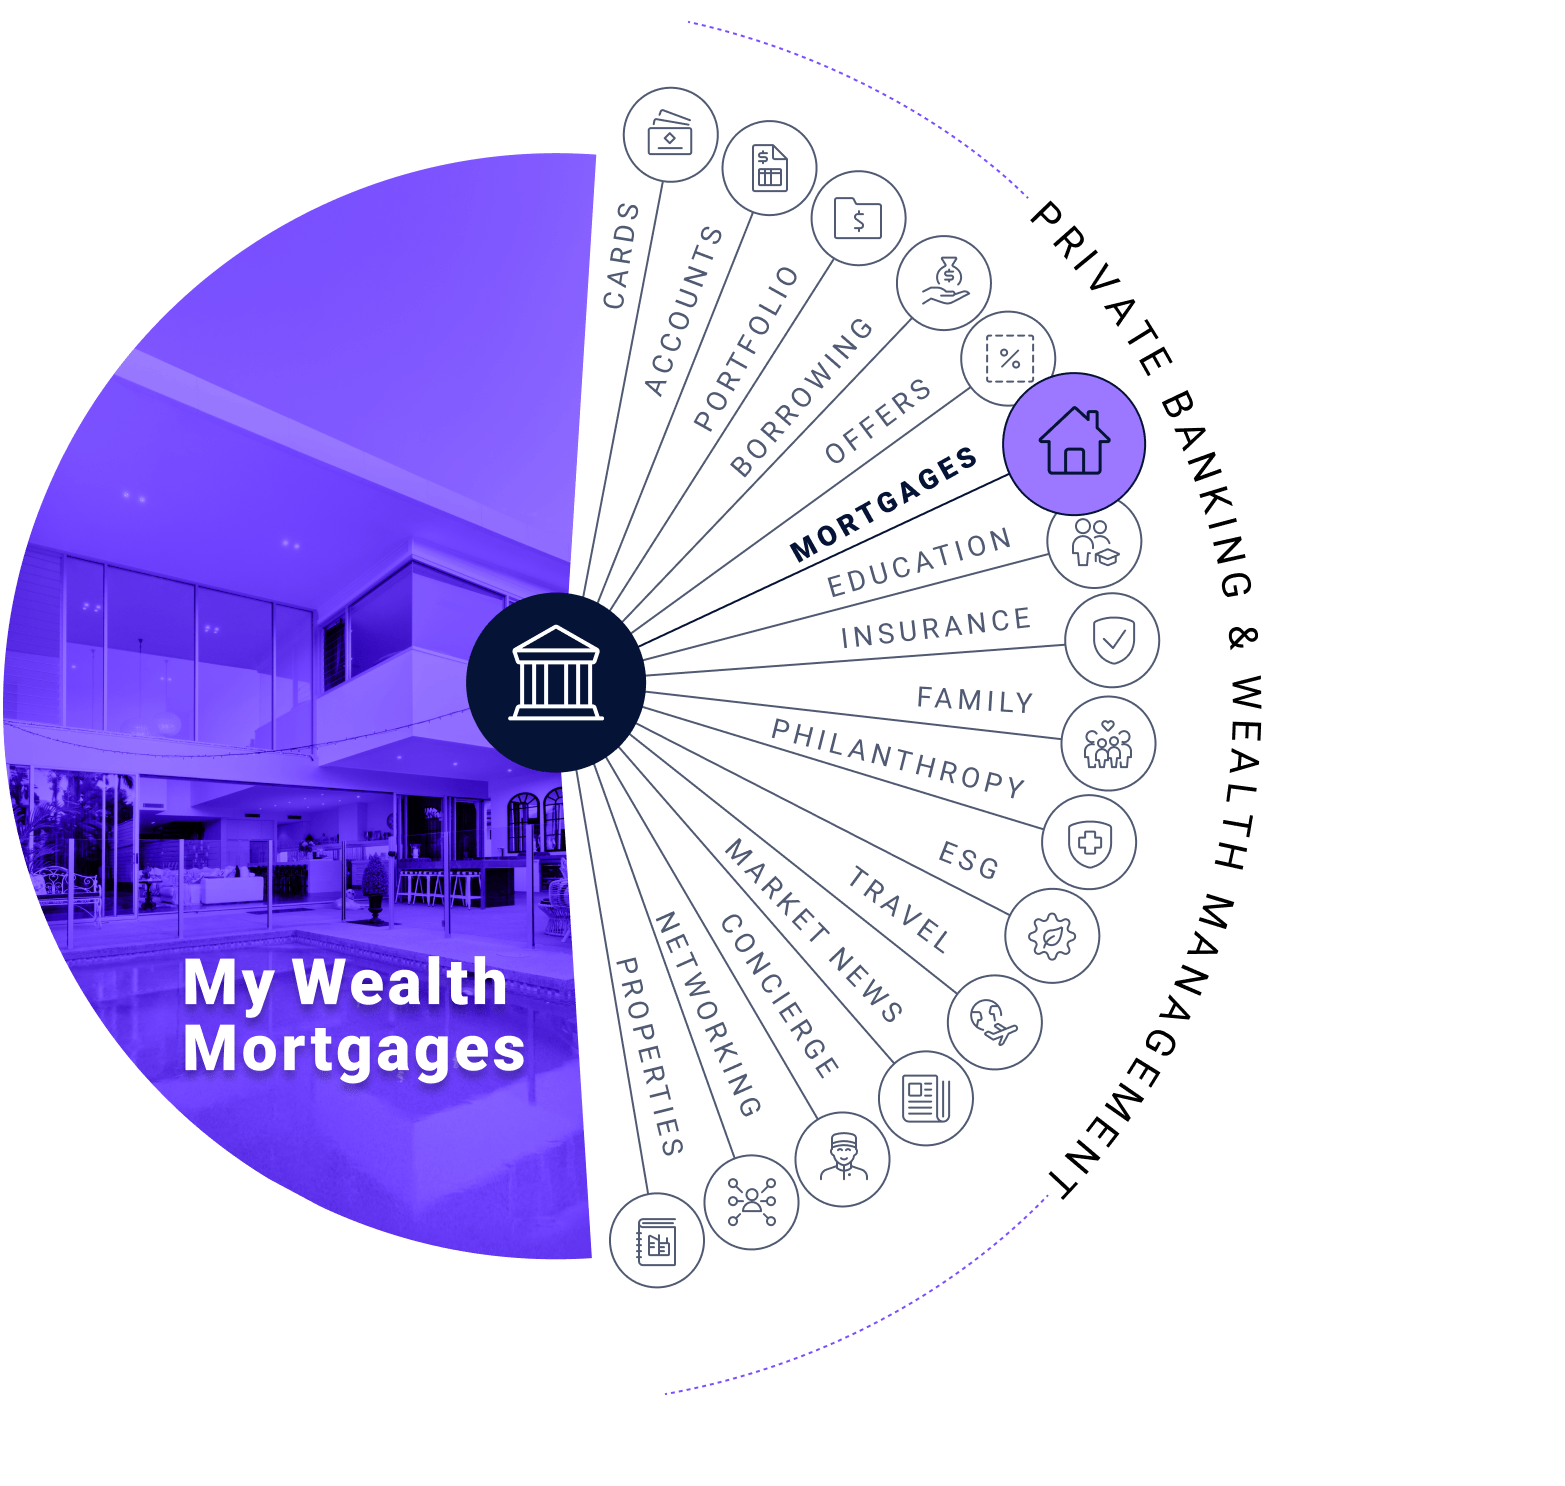 My Wealth Mortgages: cards, accounts, portfolio, borrowing, offers, mortgages, education, insurance, family, philanthropy, esg, travel, market news, concierge, networking, and properties